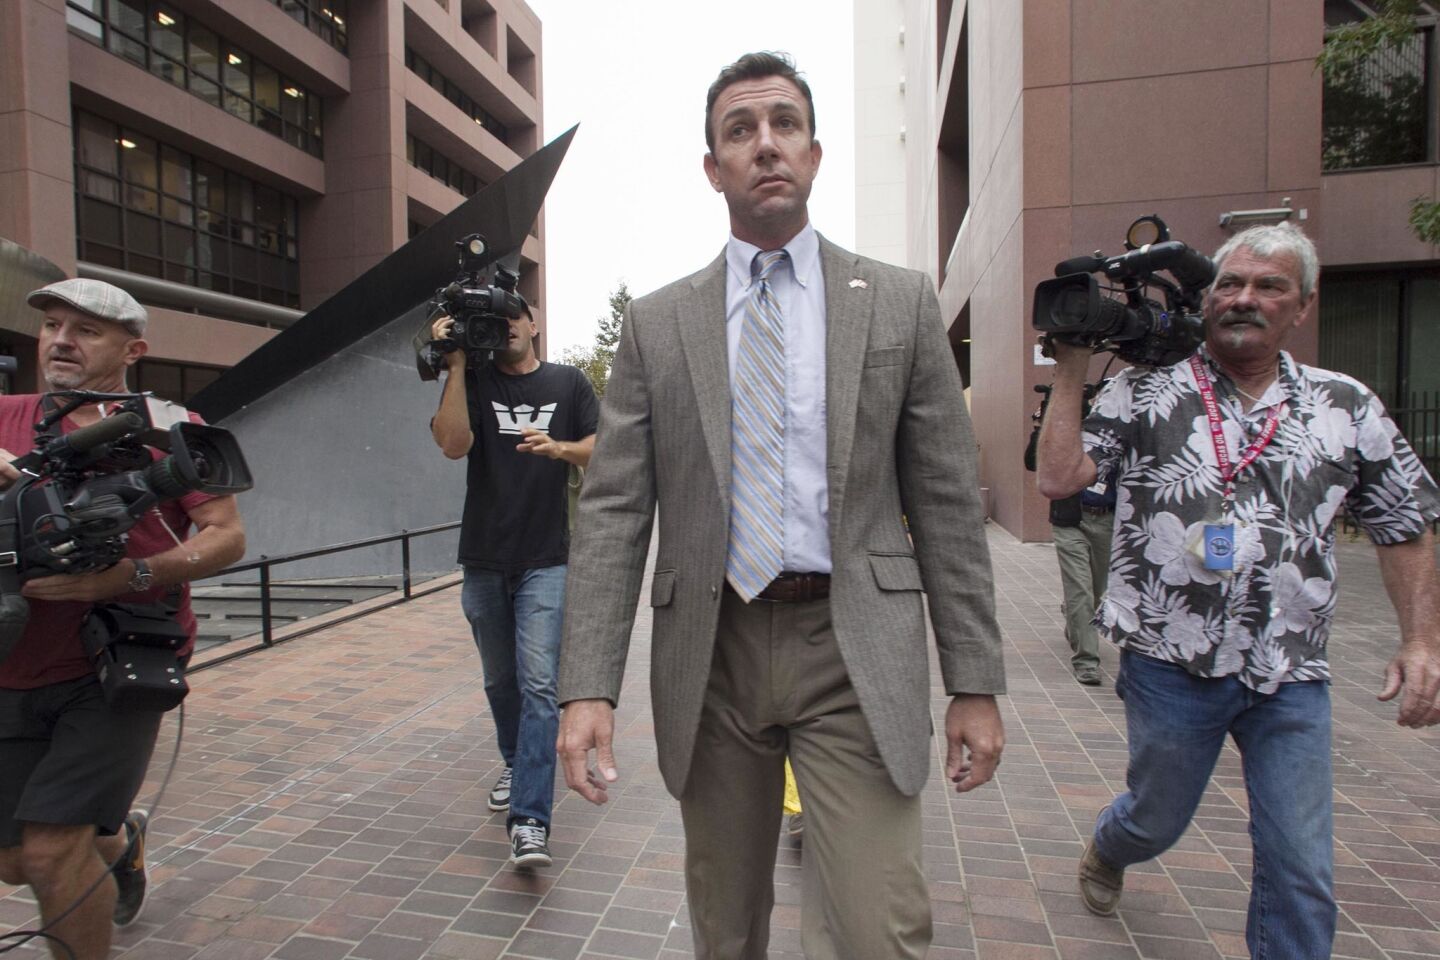 Rep. Duncan Hunter Jr. leaves the courthouse complex after he appeared in Federal Court in San Diego on Monday, Sept. 24 for a status hearing on his case. He and his wife are charged with numerous counts of misappropriation of campaign funds.